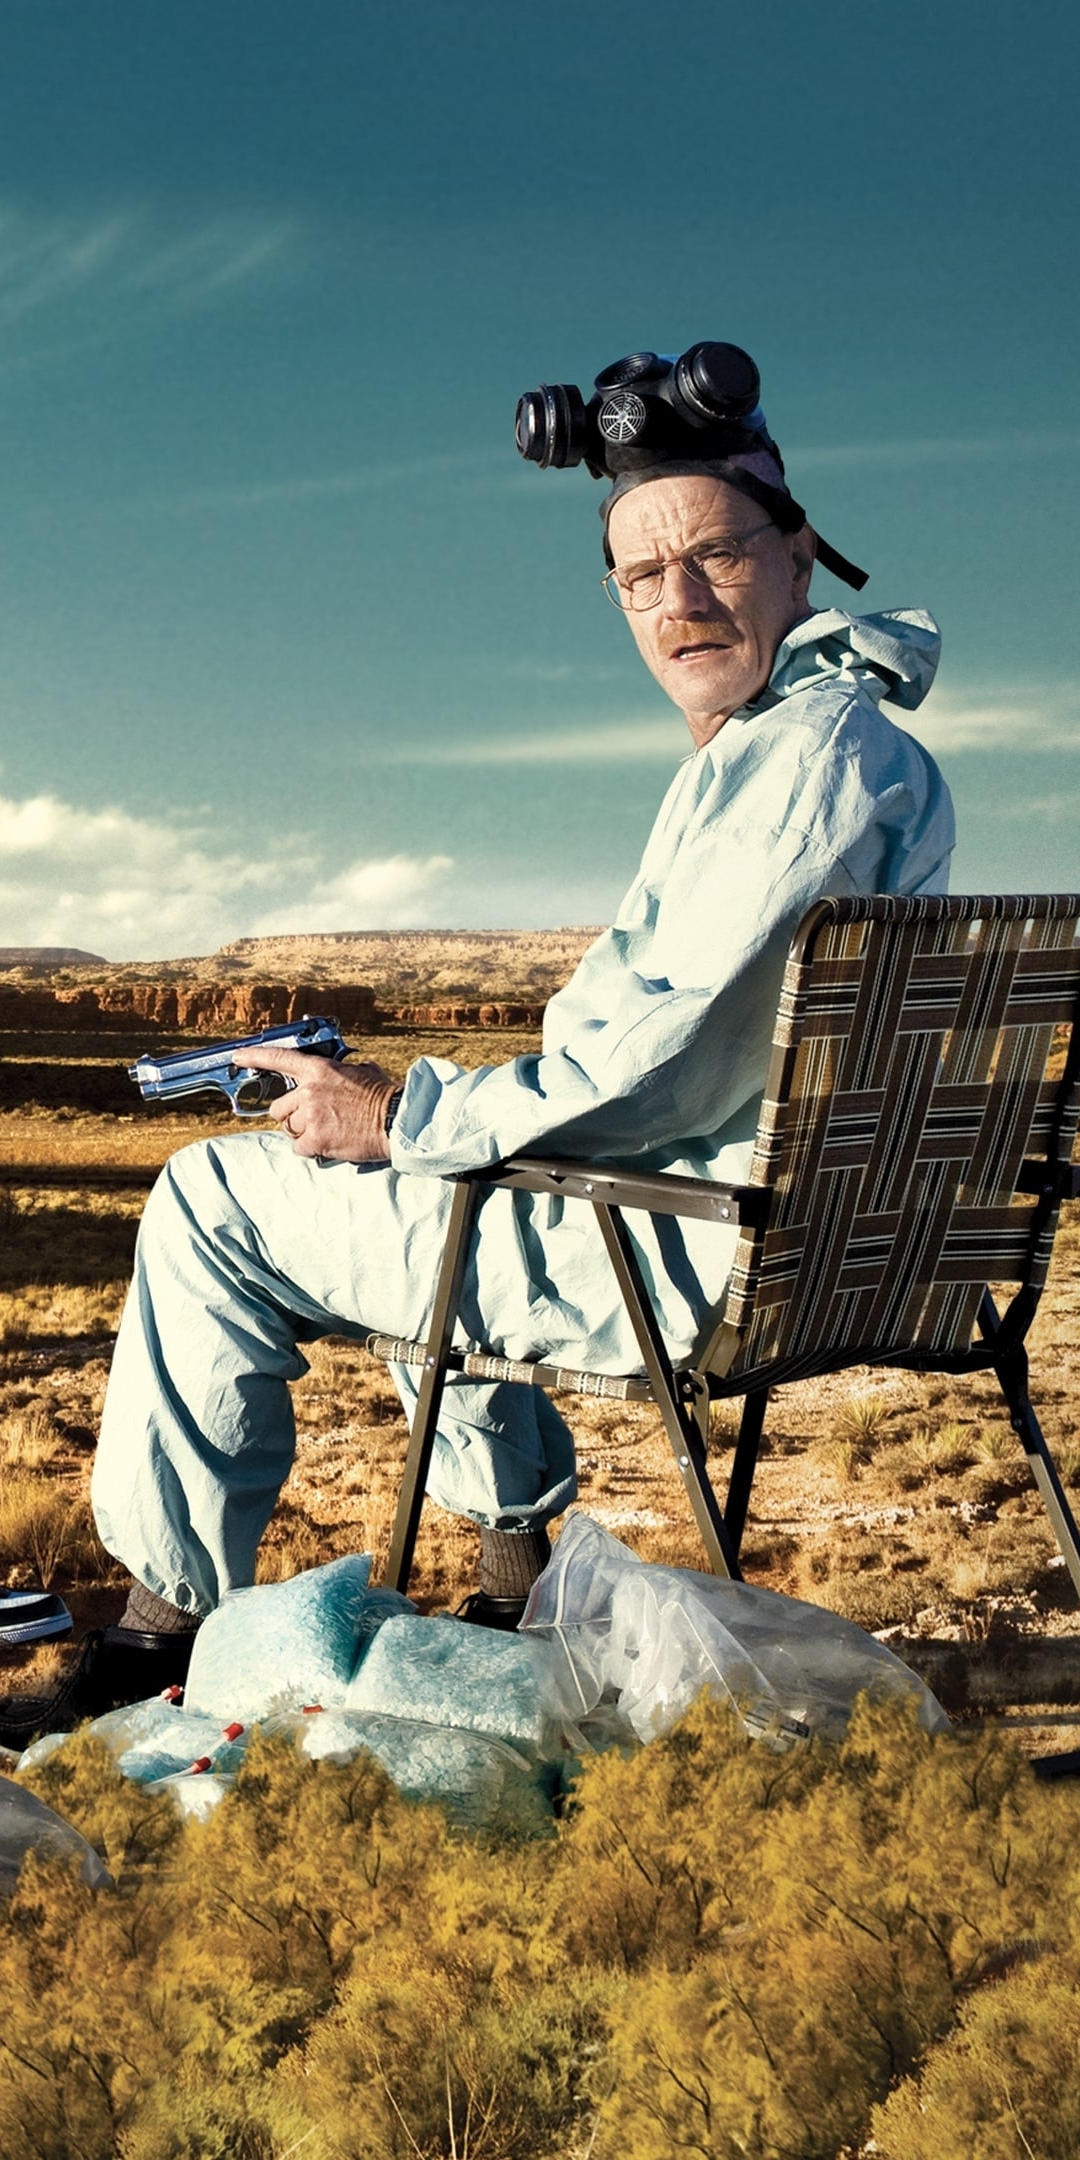 1395207 free wallpaper 720x1280 for phone, download images tv show, breaking bad, bryan cranston, walter white 720x1280 for mobile